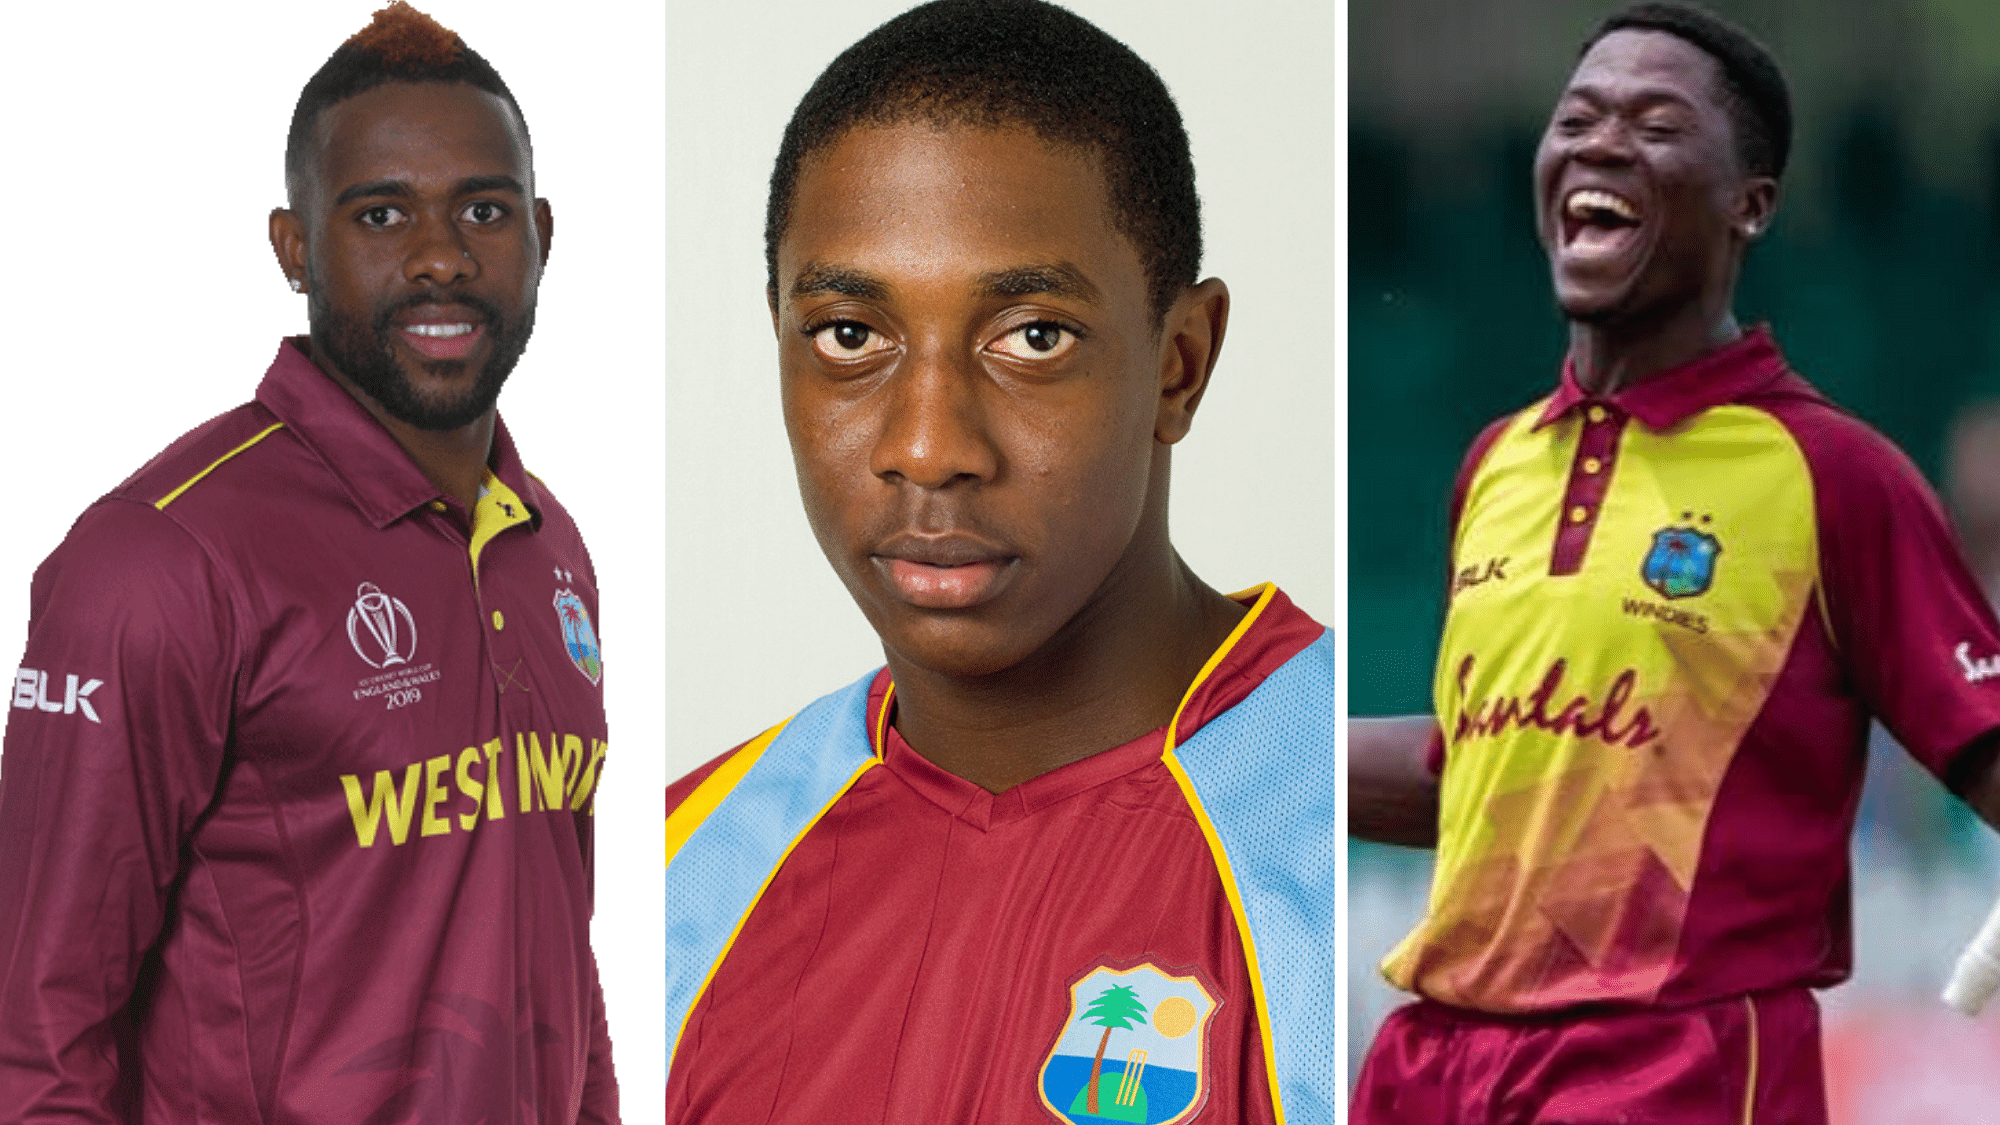 Fabian Allen, Hayden Walsh jr. and Sherfane Rutherford will be looking to extend their stint with the national team and be in contention for selection to the 2020 T20 World Cup.